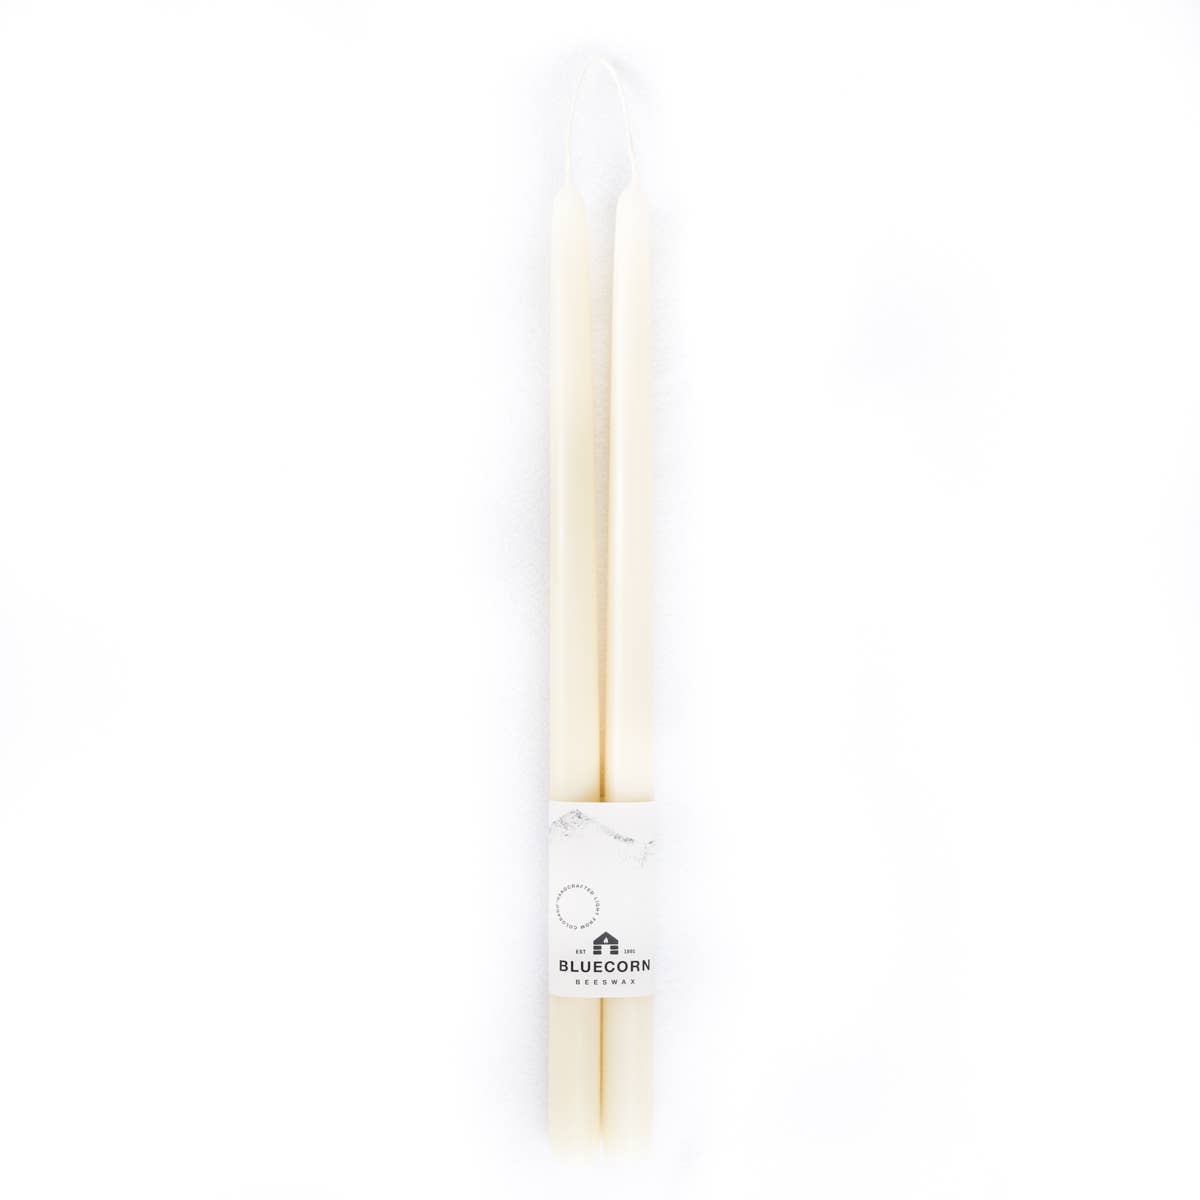 Pair of Hand-Dipped Beeswax Taper Candles: 10" / Red